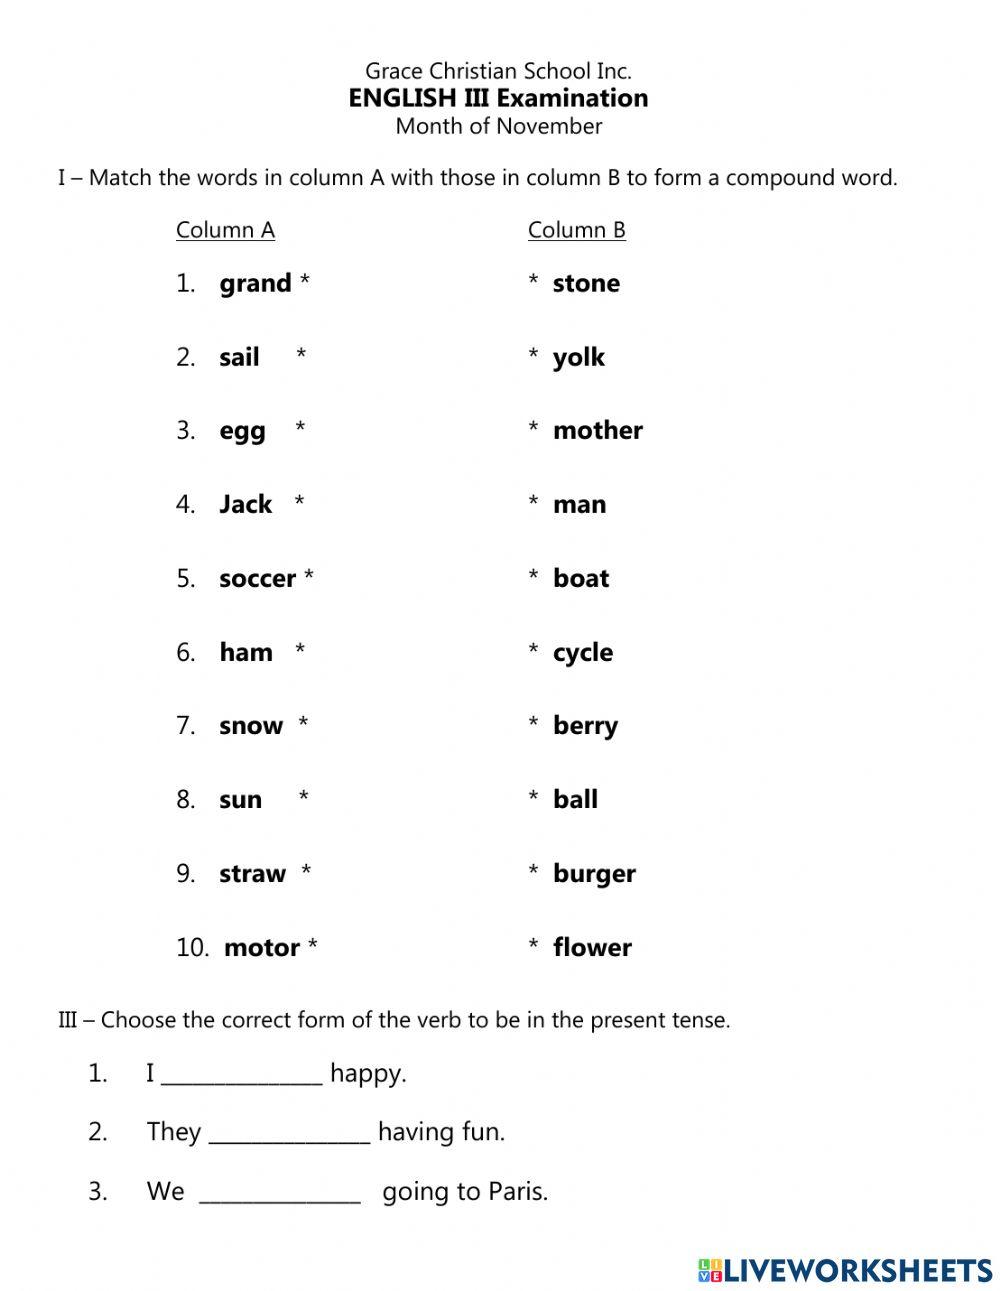 Compound word-subject verb agreement